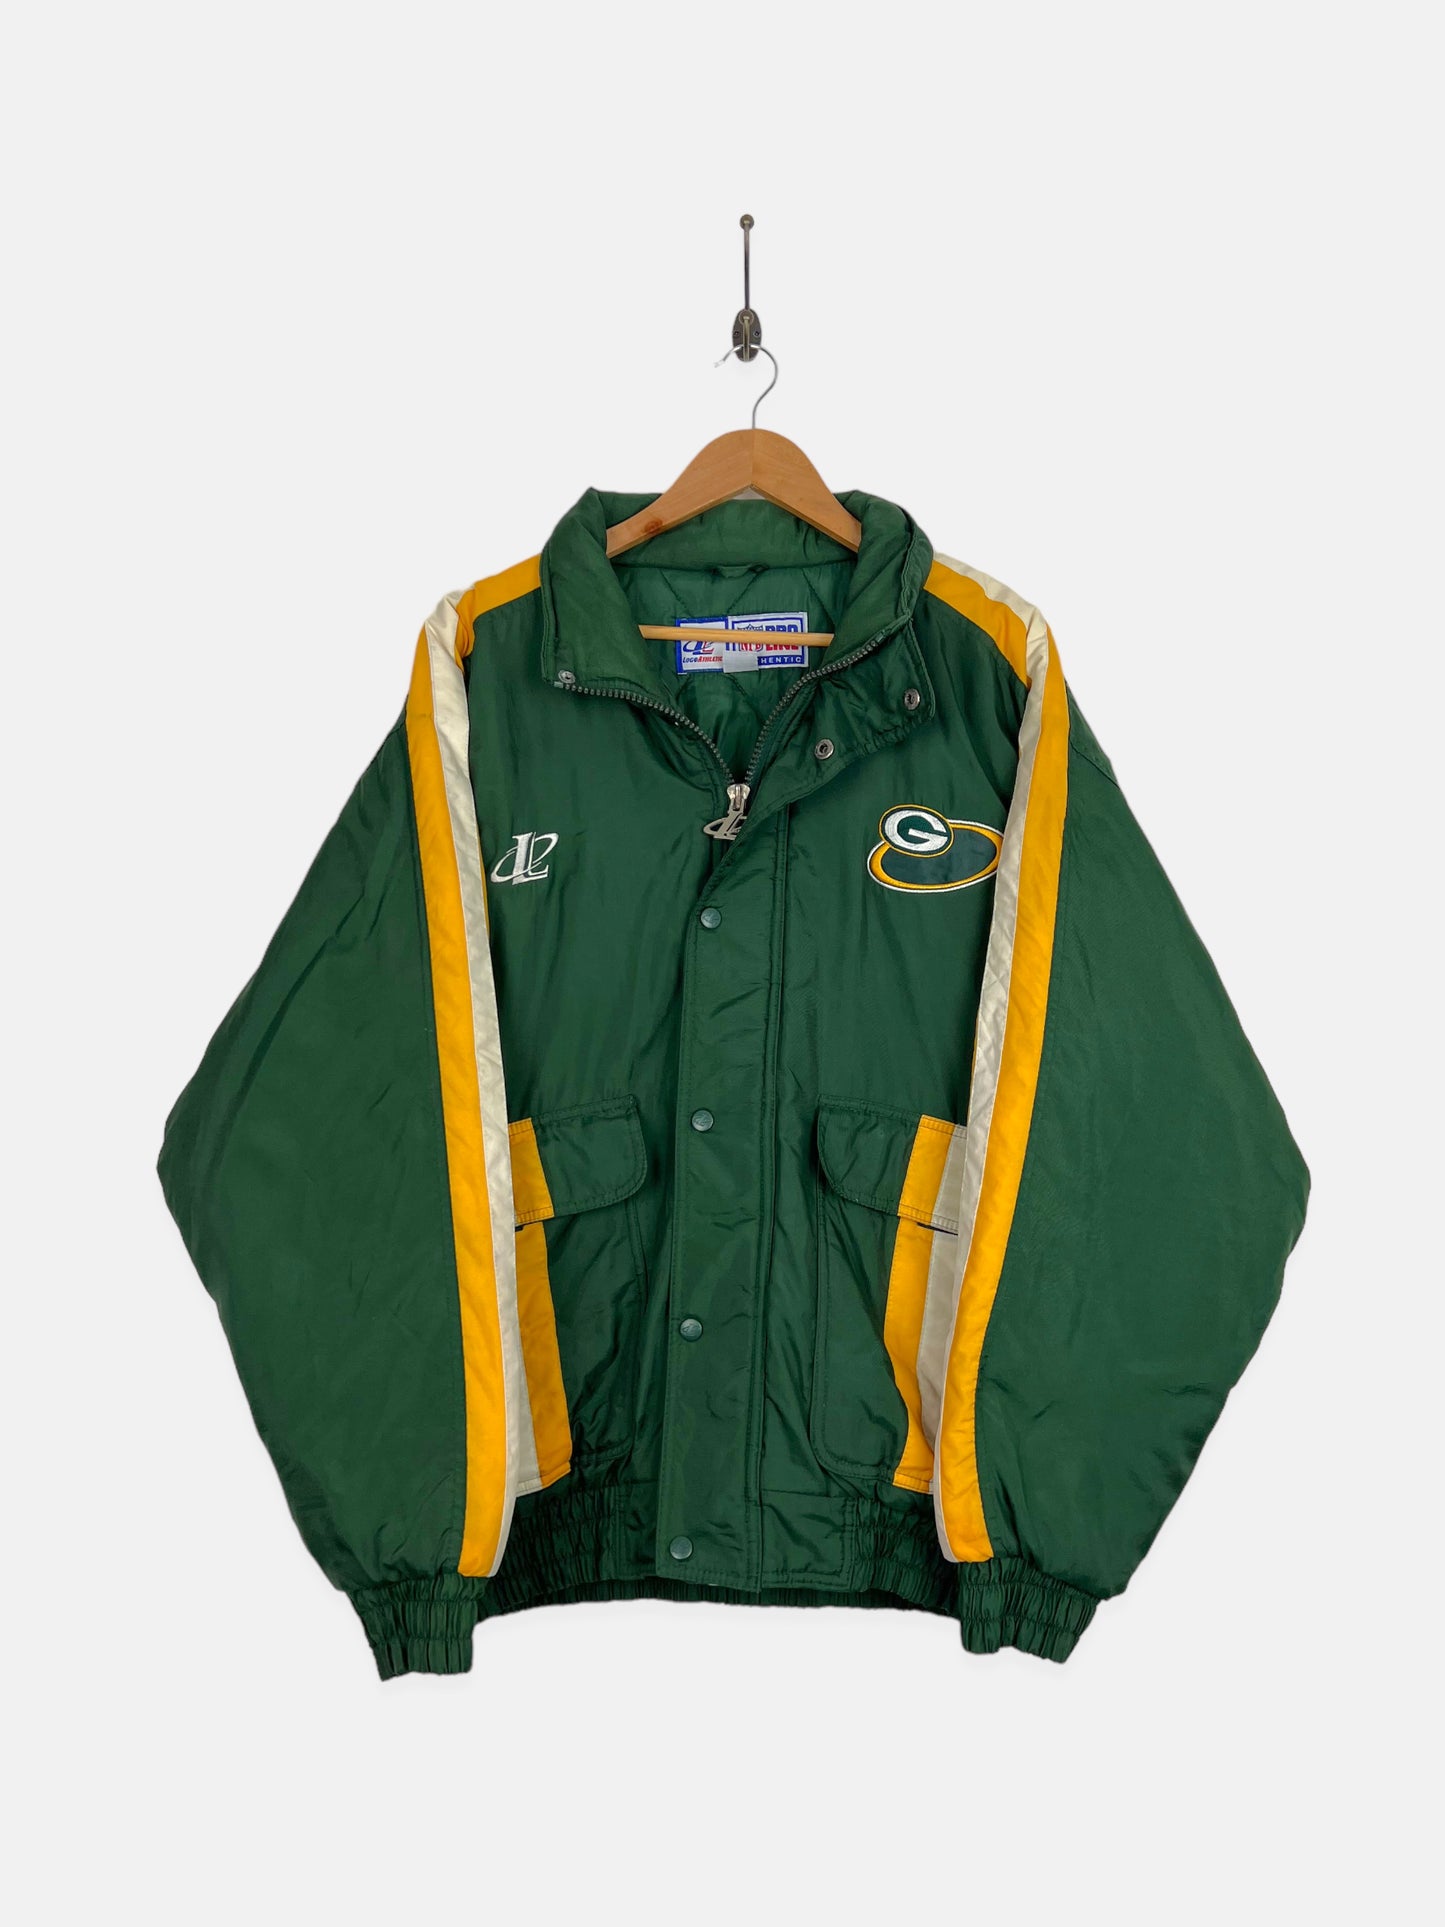 90's Green Bay Packers NFL Embroidered Puffer Jacket Size L